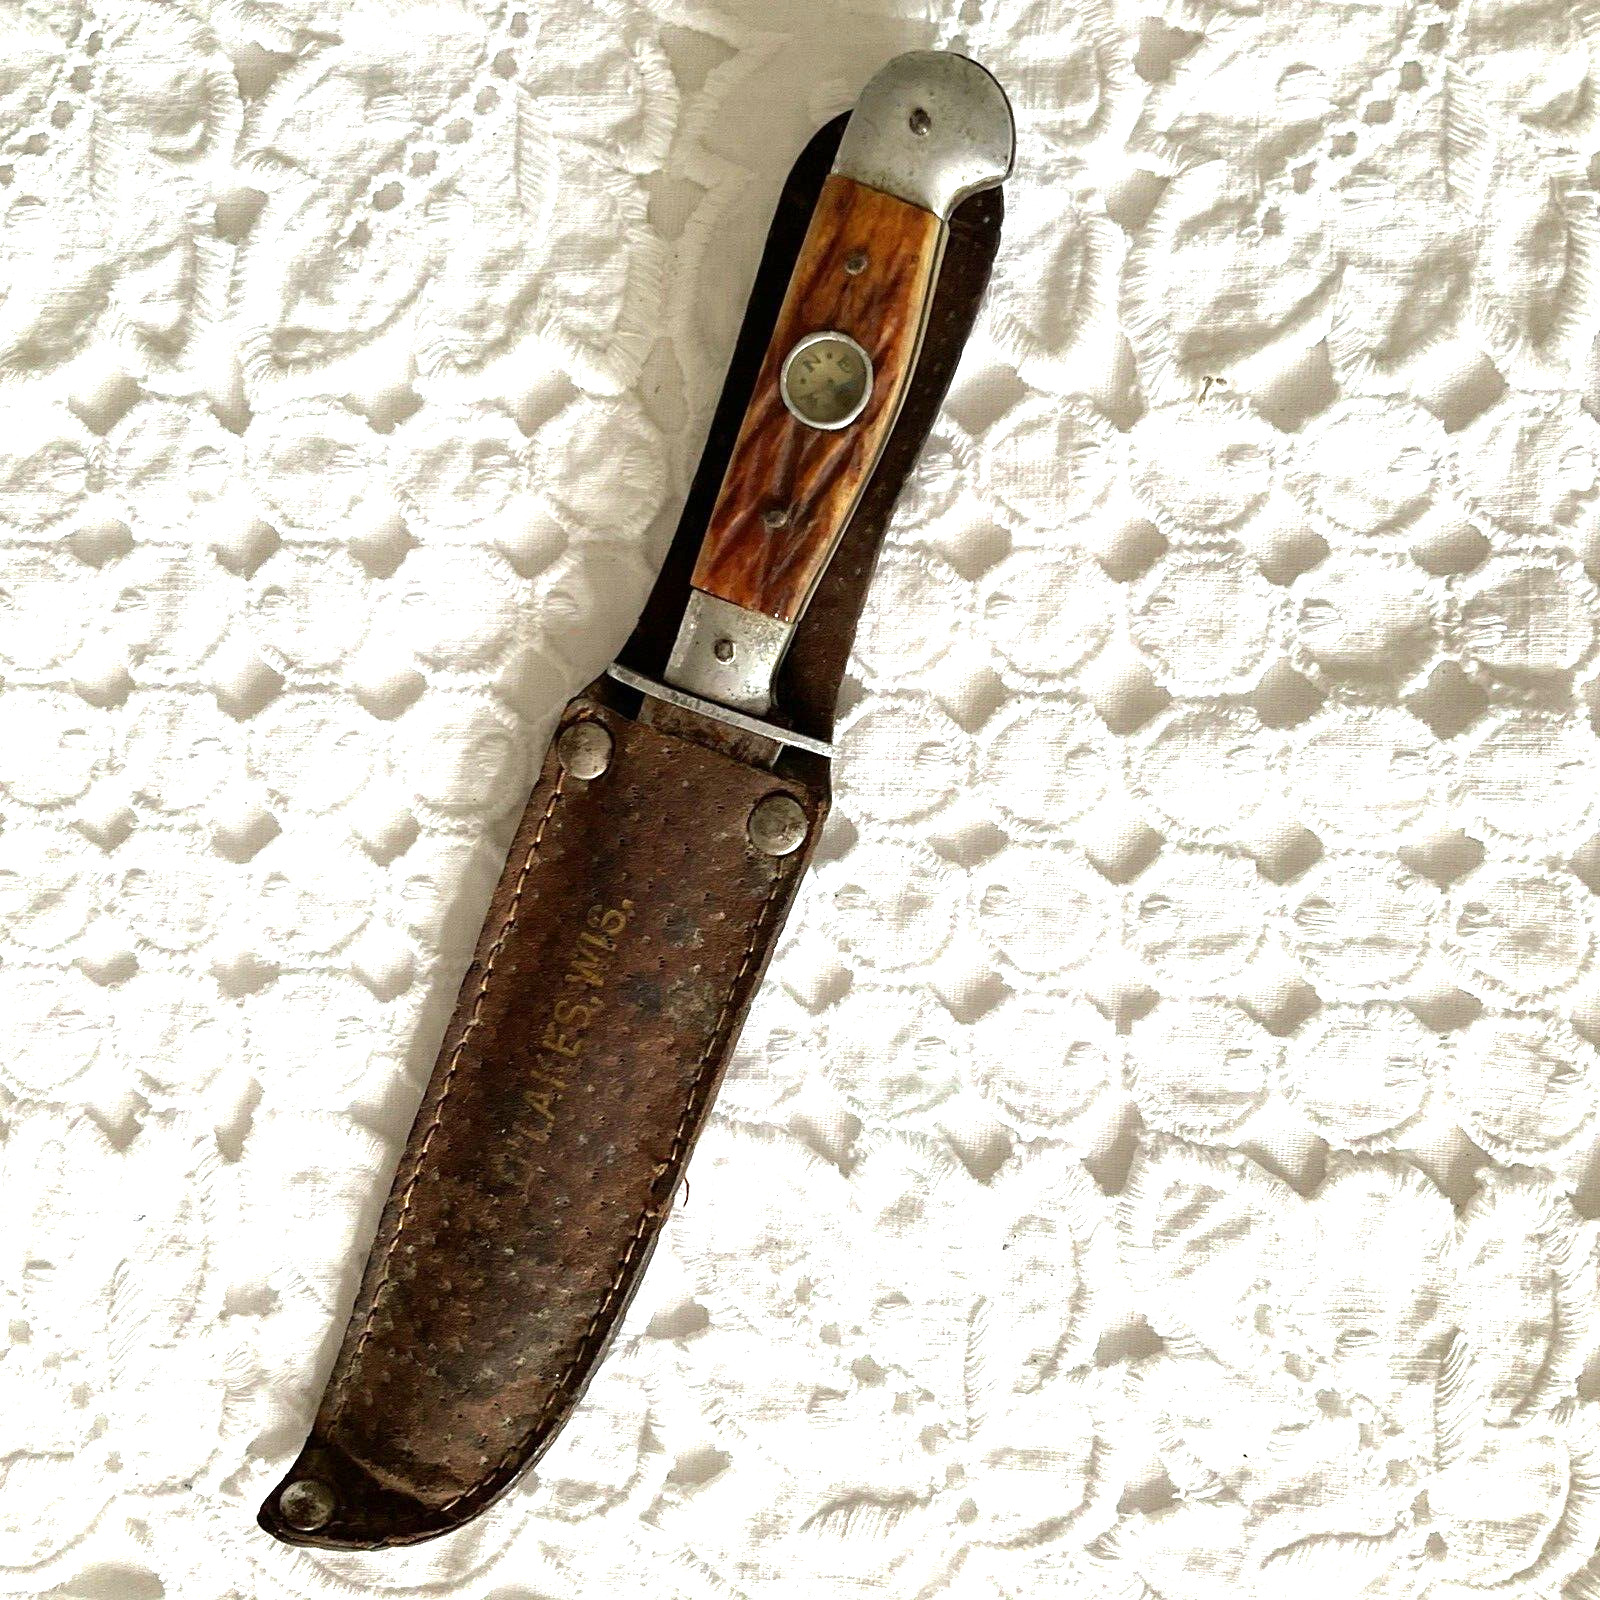 Vintage Thrifco Knife With Compass In Handle Not Working in Japan Belt Sheath